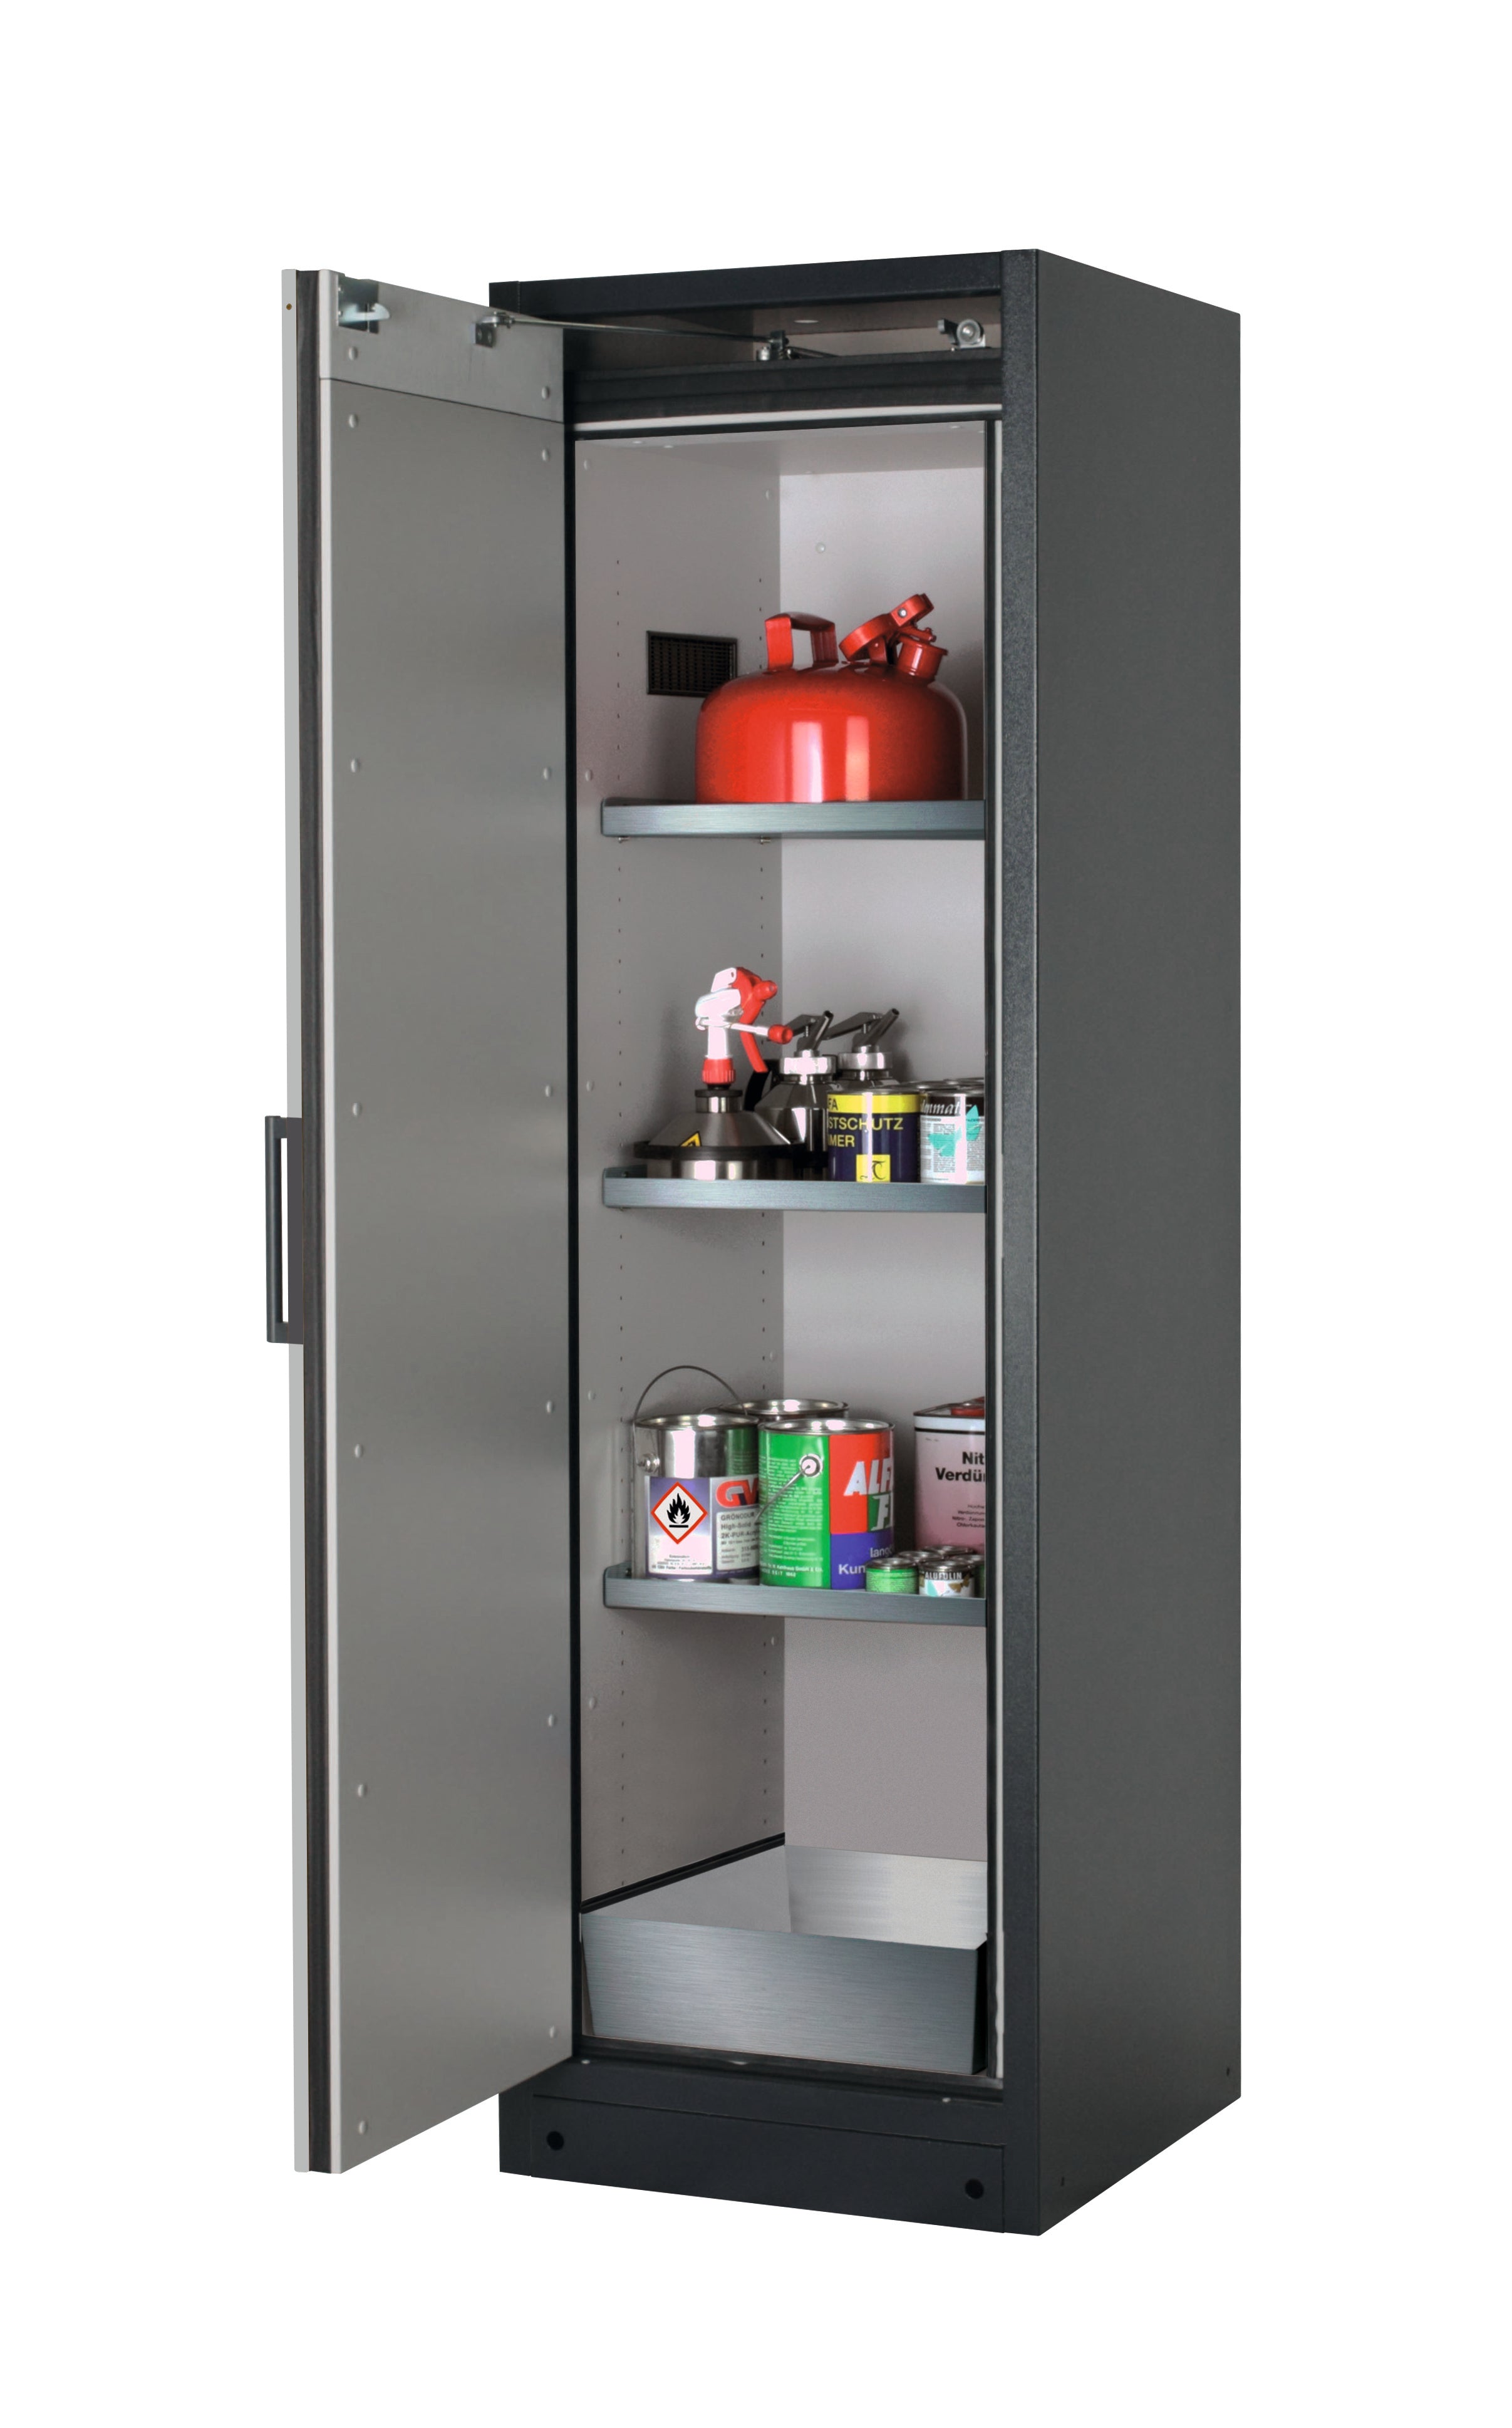 Type 90 safety storage cabinet Q-PEGASUS-90 model Q90.195.060.WDAC in pure white RAL 9010 with 3x shelf standard (stainless steel 1.4301),